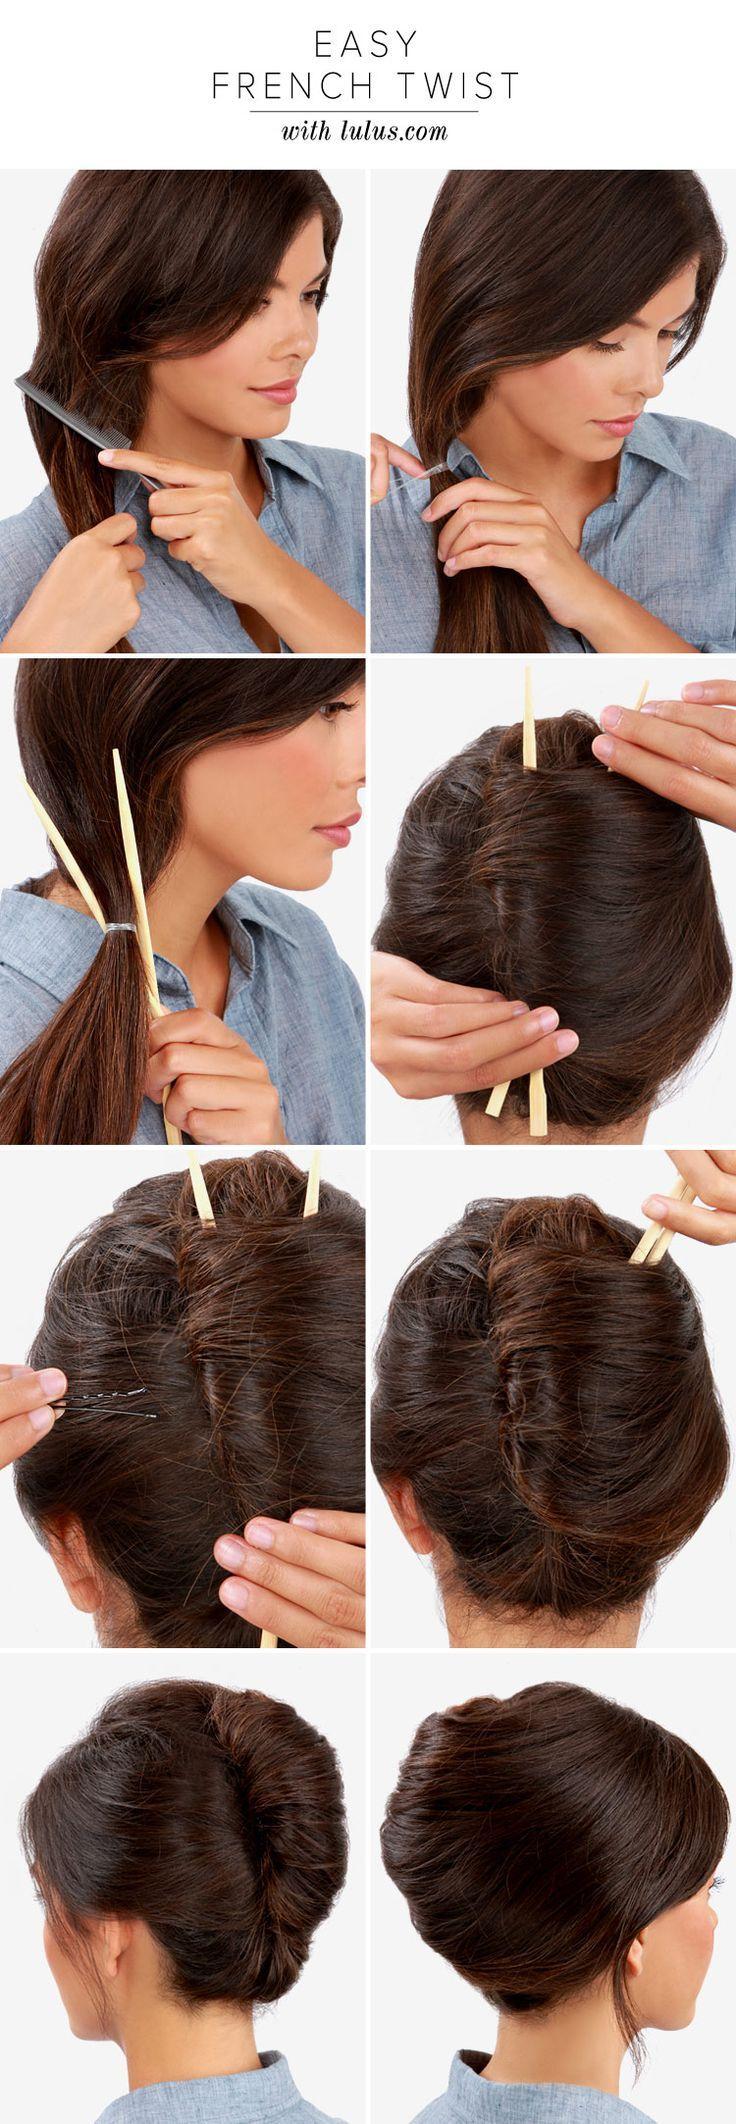 Mariage - If You've Ever Wondered How To Achieve The Perfect French Twist We Have Just The Guide For You! Check Out How To Use Chopsticks To Create This Chic Look!